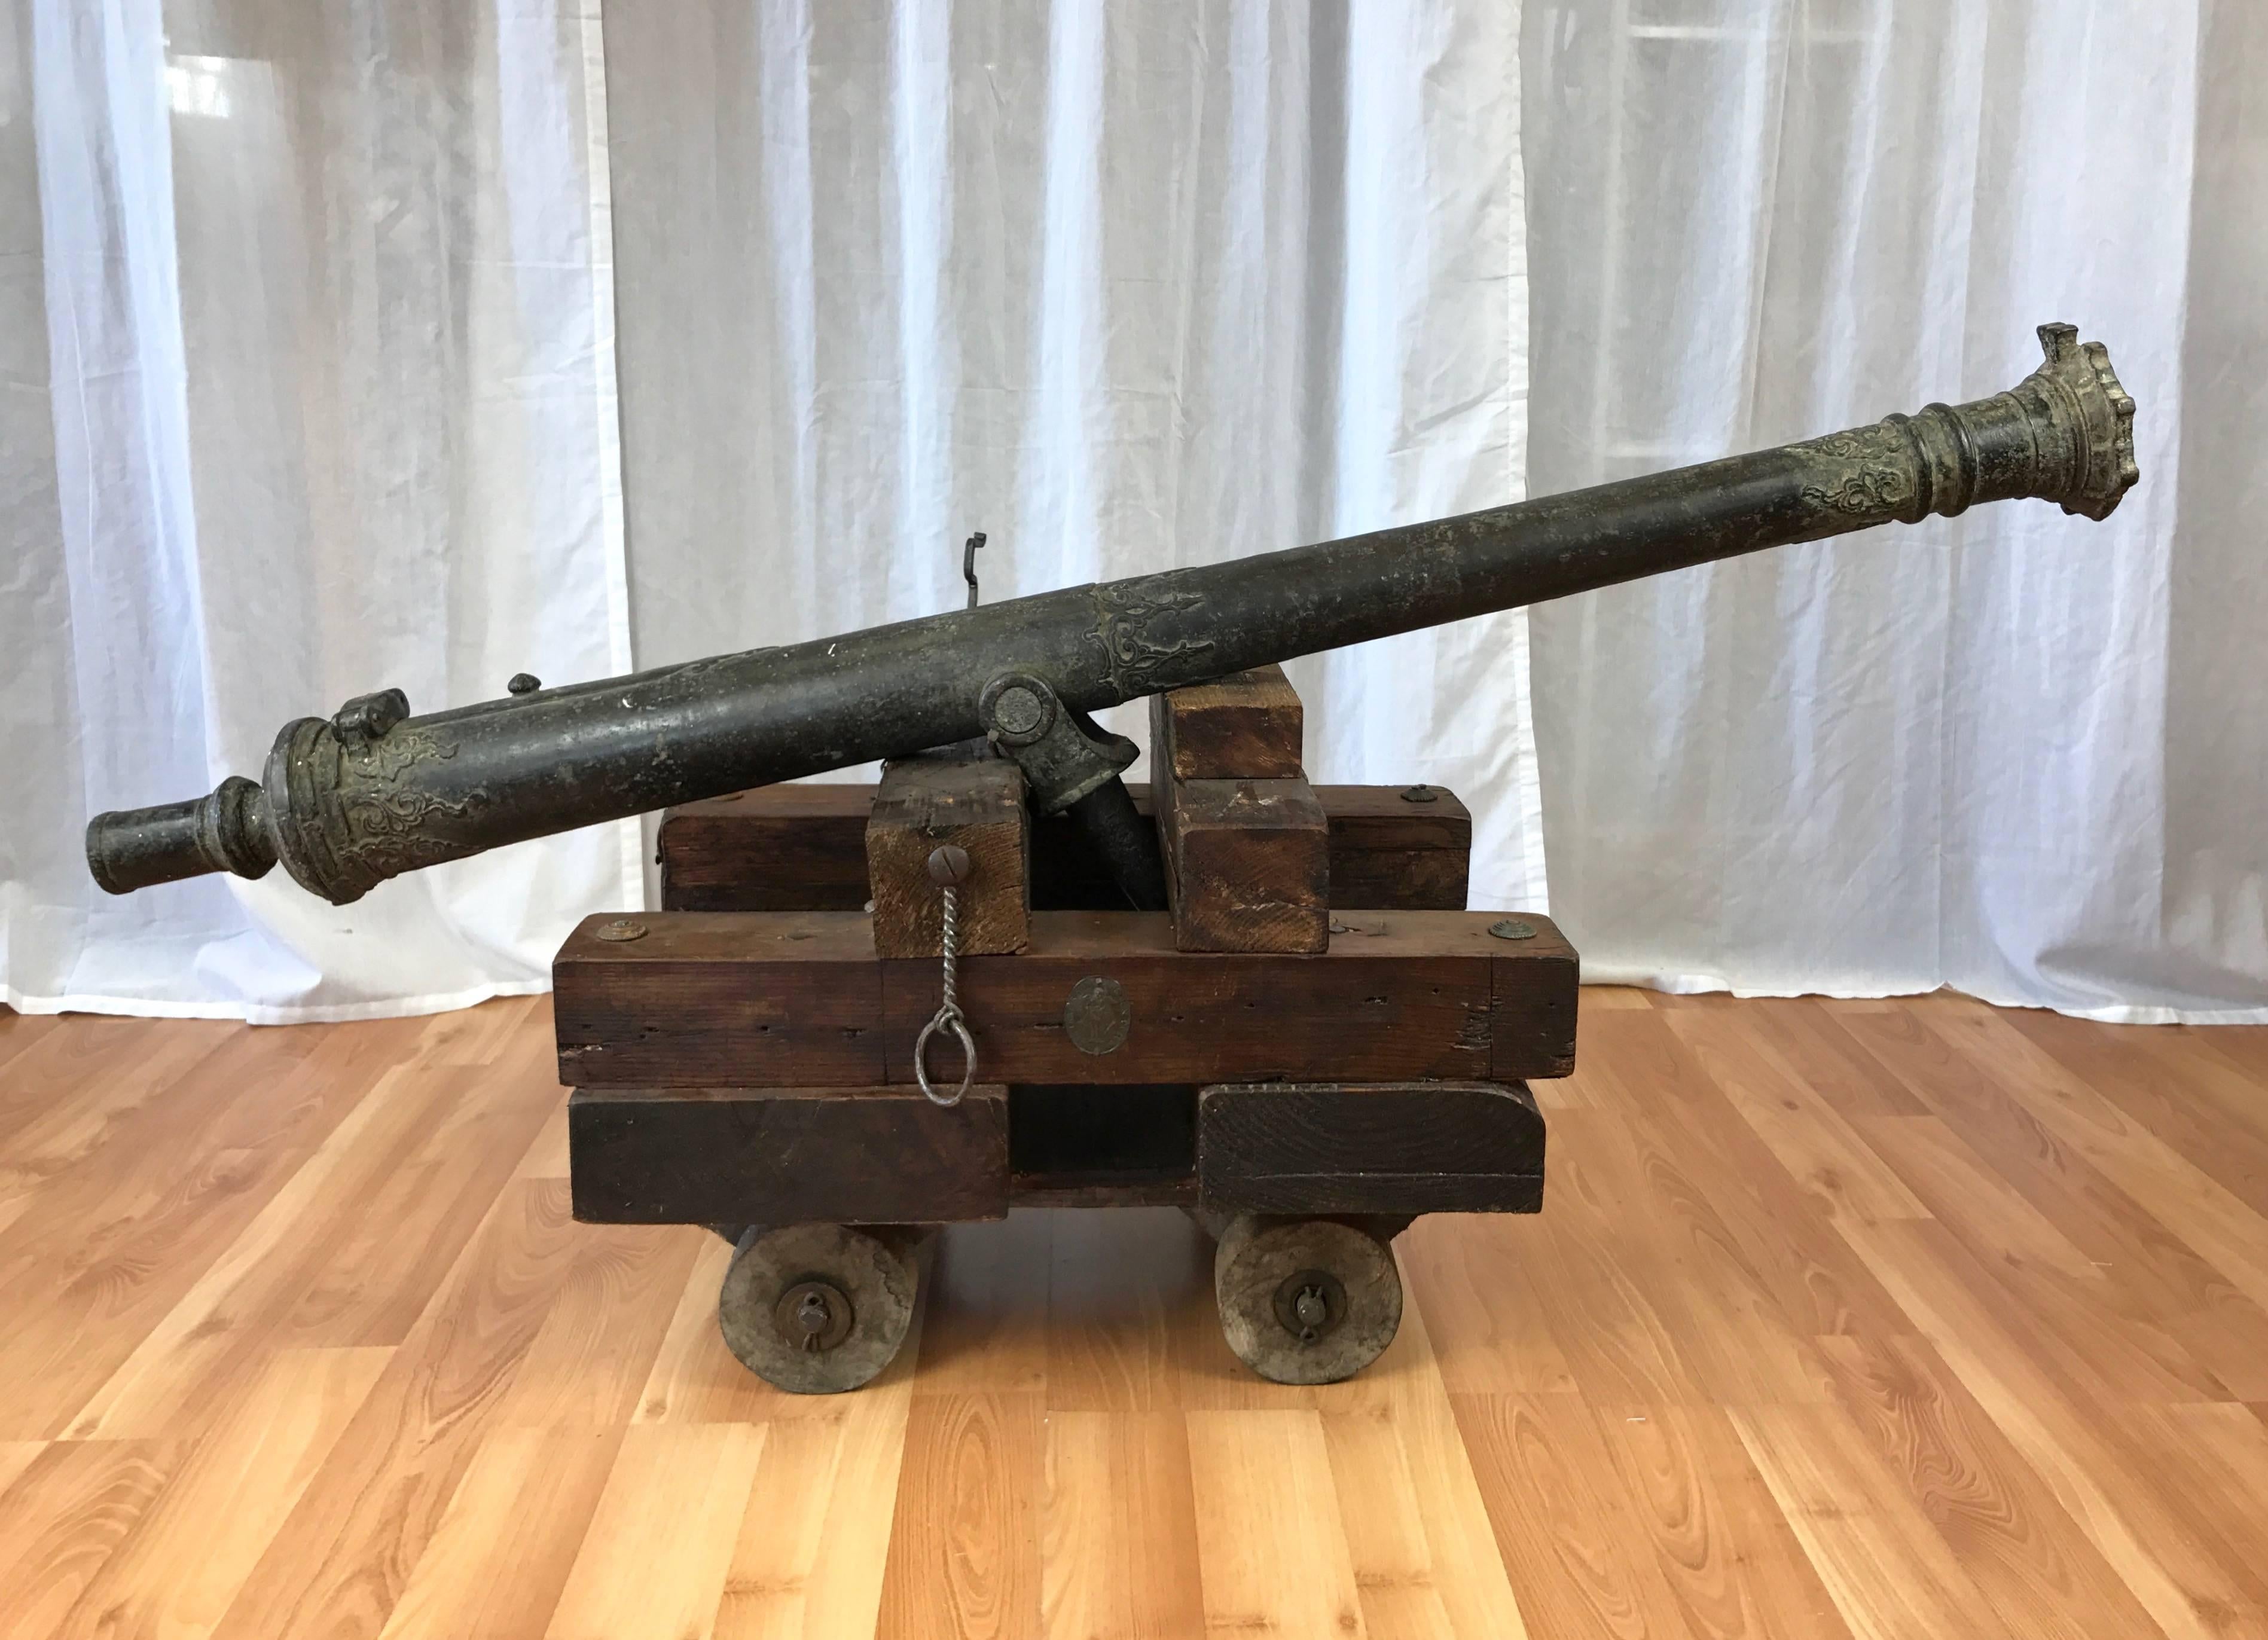 An 18th century patinated bronze lantaka cannon from South East Asia on custom-made functional wood carriage.

Medallion-shaped muzzle nicely complements raised filigree ornamentation around the upper chase, girdle, vent and breech. Trunnion is